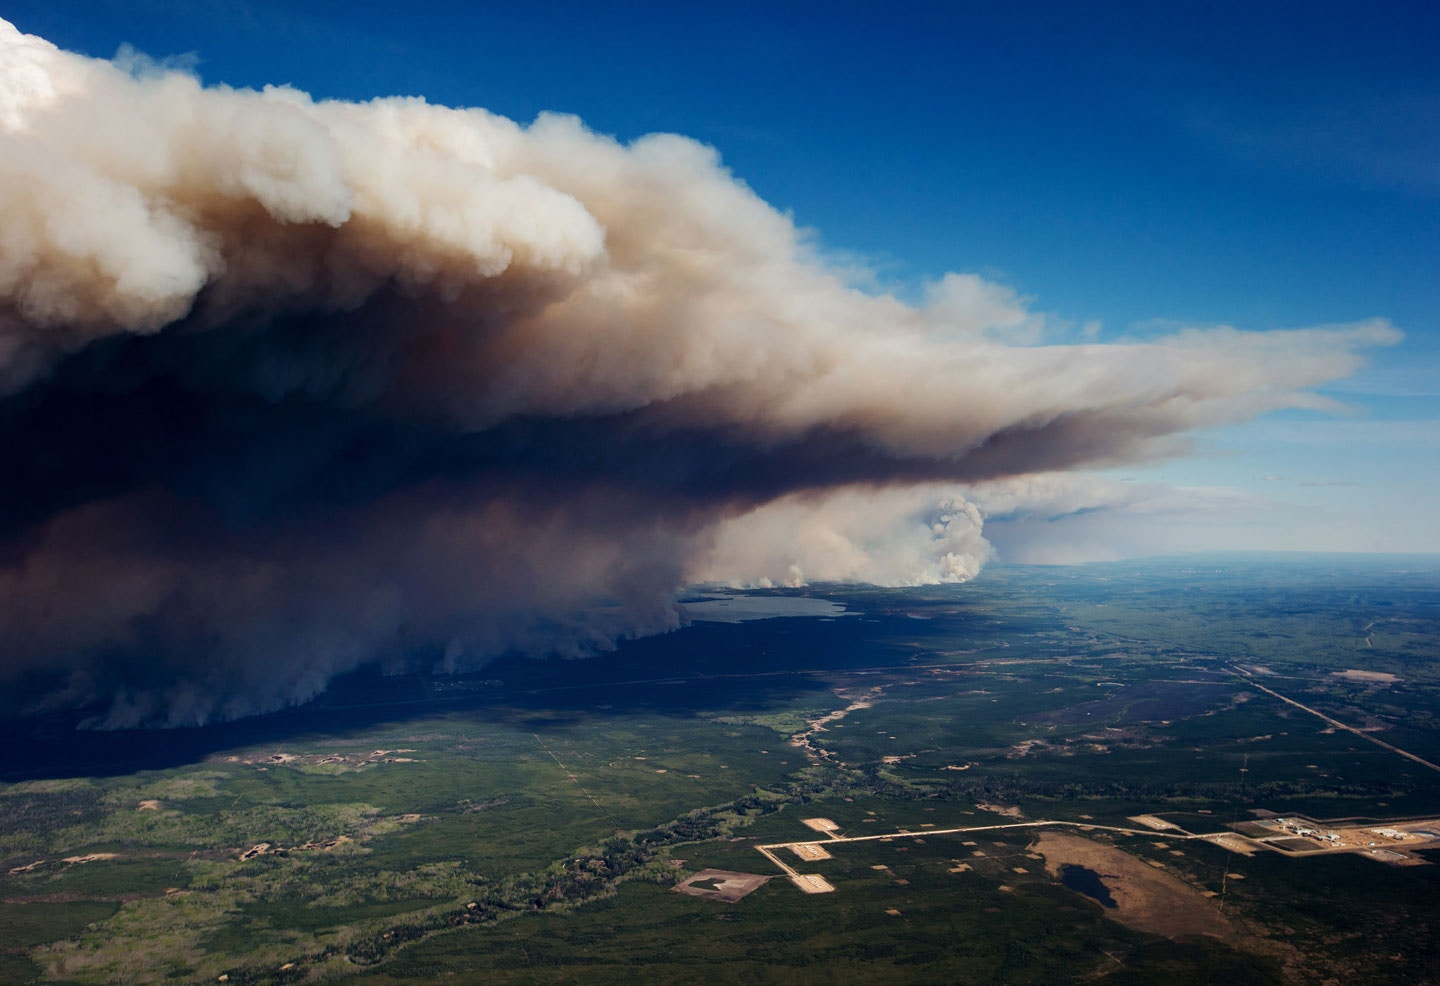 A huge plume of smoke from wildfires burning rises over Fort McMurray in this aerial photograph taken in Alberta, Canada, on Friday, May 6, 2016. The wildfires ravaging Canada's oil hub in northern Alberta have rapidly spread to an area bigger than New York city, prompting the air lift of more than 8,000 evacuees as firefighters seek to salvage critical infrastructure. Photographer: Darryl Dyck/Bloomberg via Getty Images